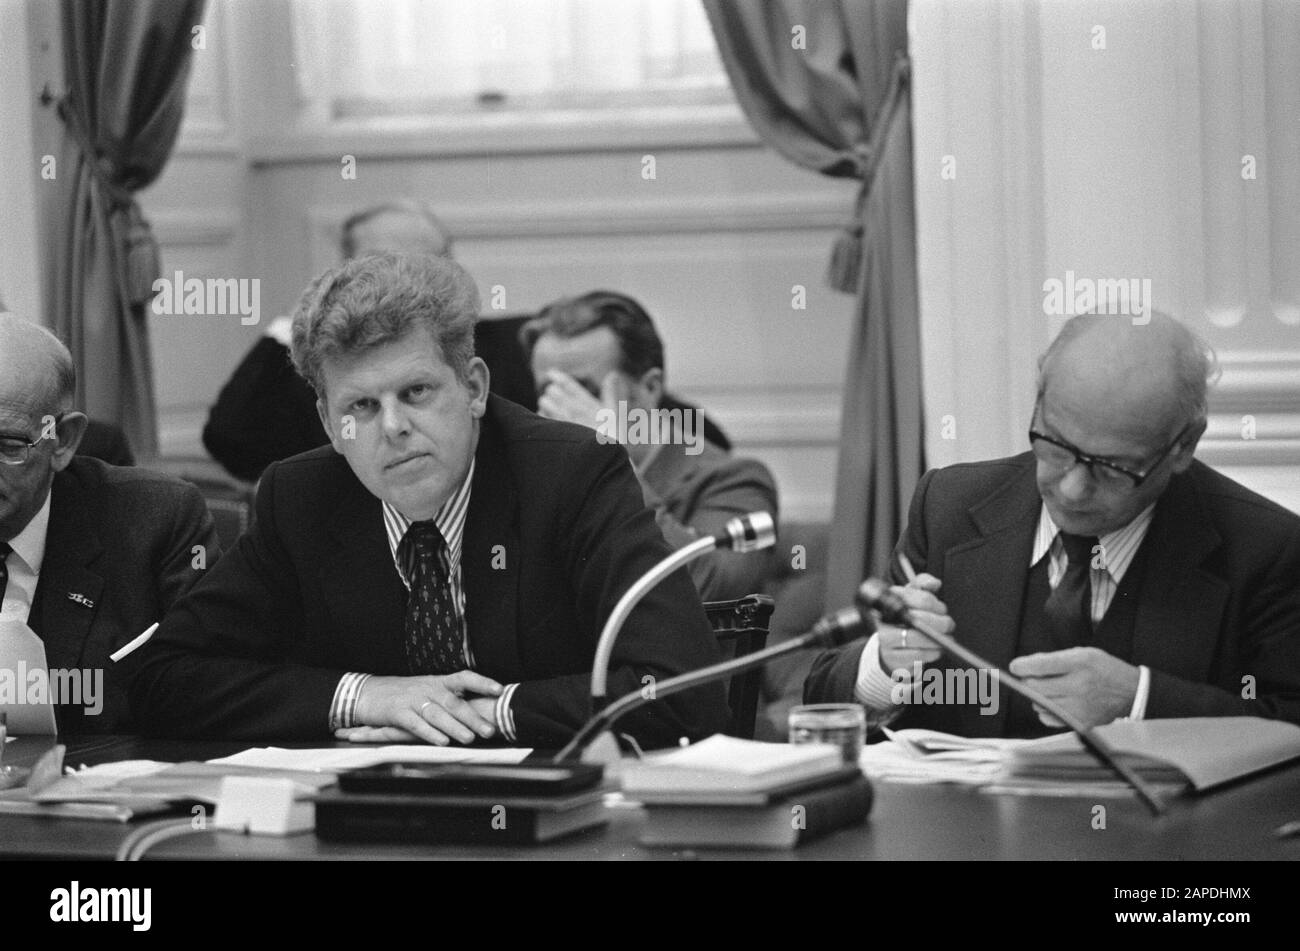 General Considerations Second Chamber, number 22 and 23 Duisenberg Date: October 10, 1973 Keywords: political Stock Photo